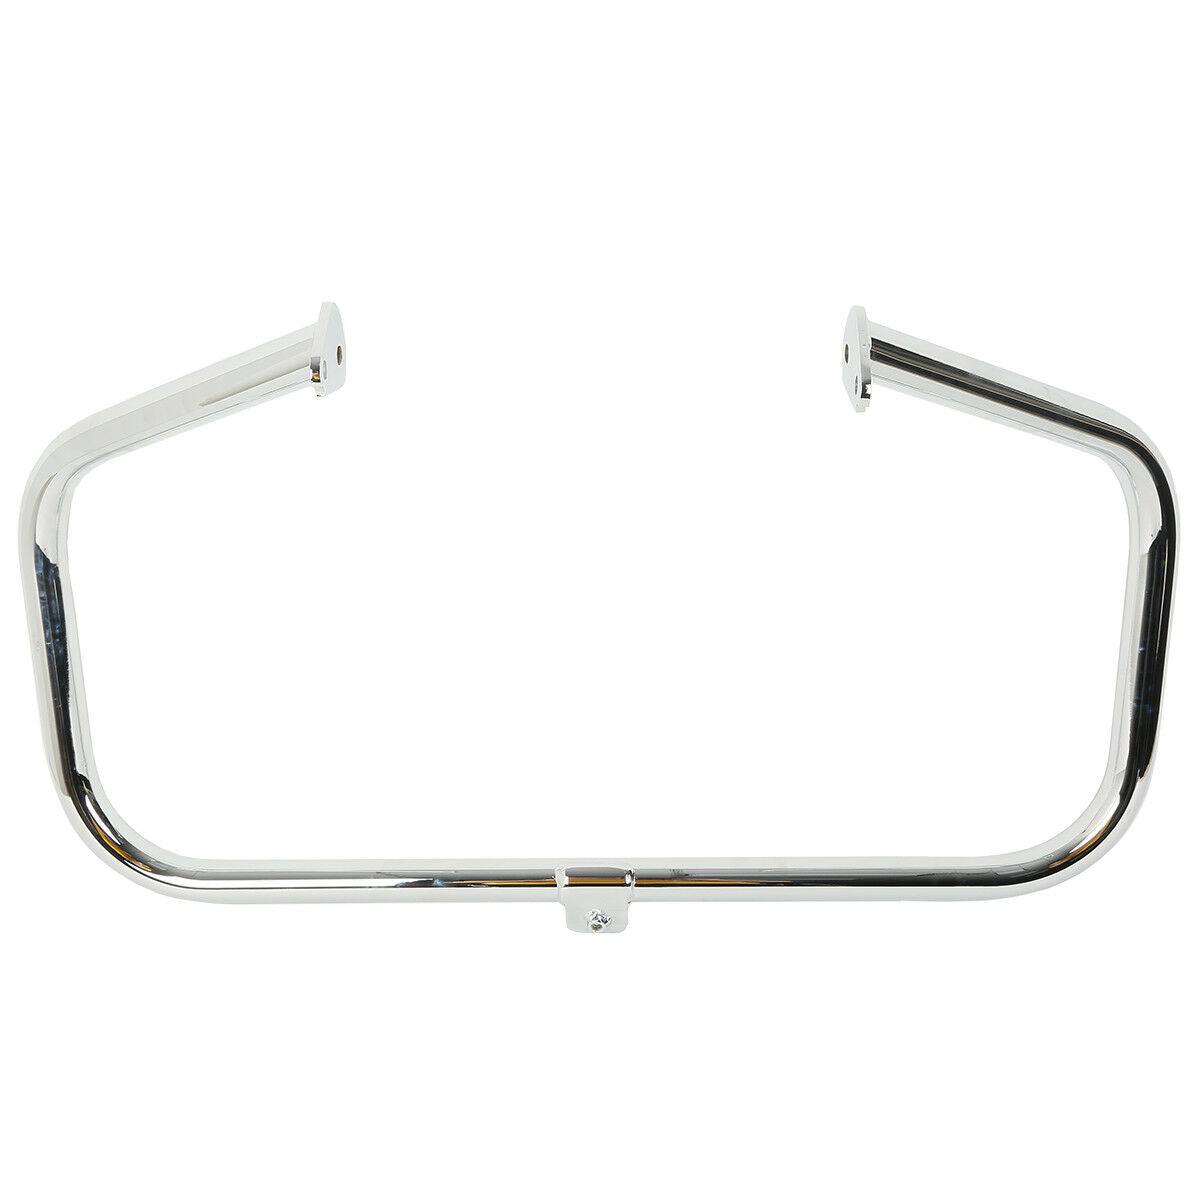 Engine Guard Highway Crash Bar Fit For Harley Road Street Electra Glide 97-08 - Moto Life Products